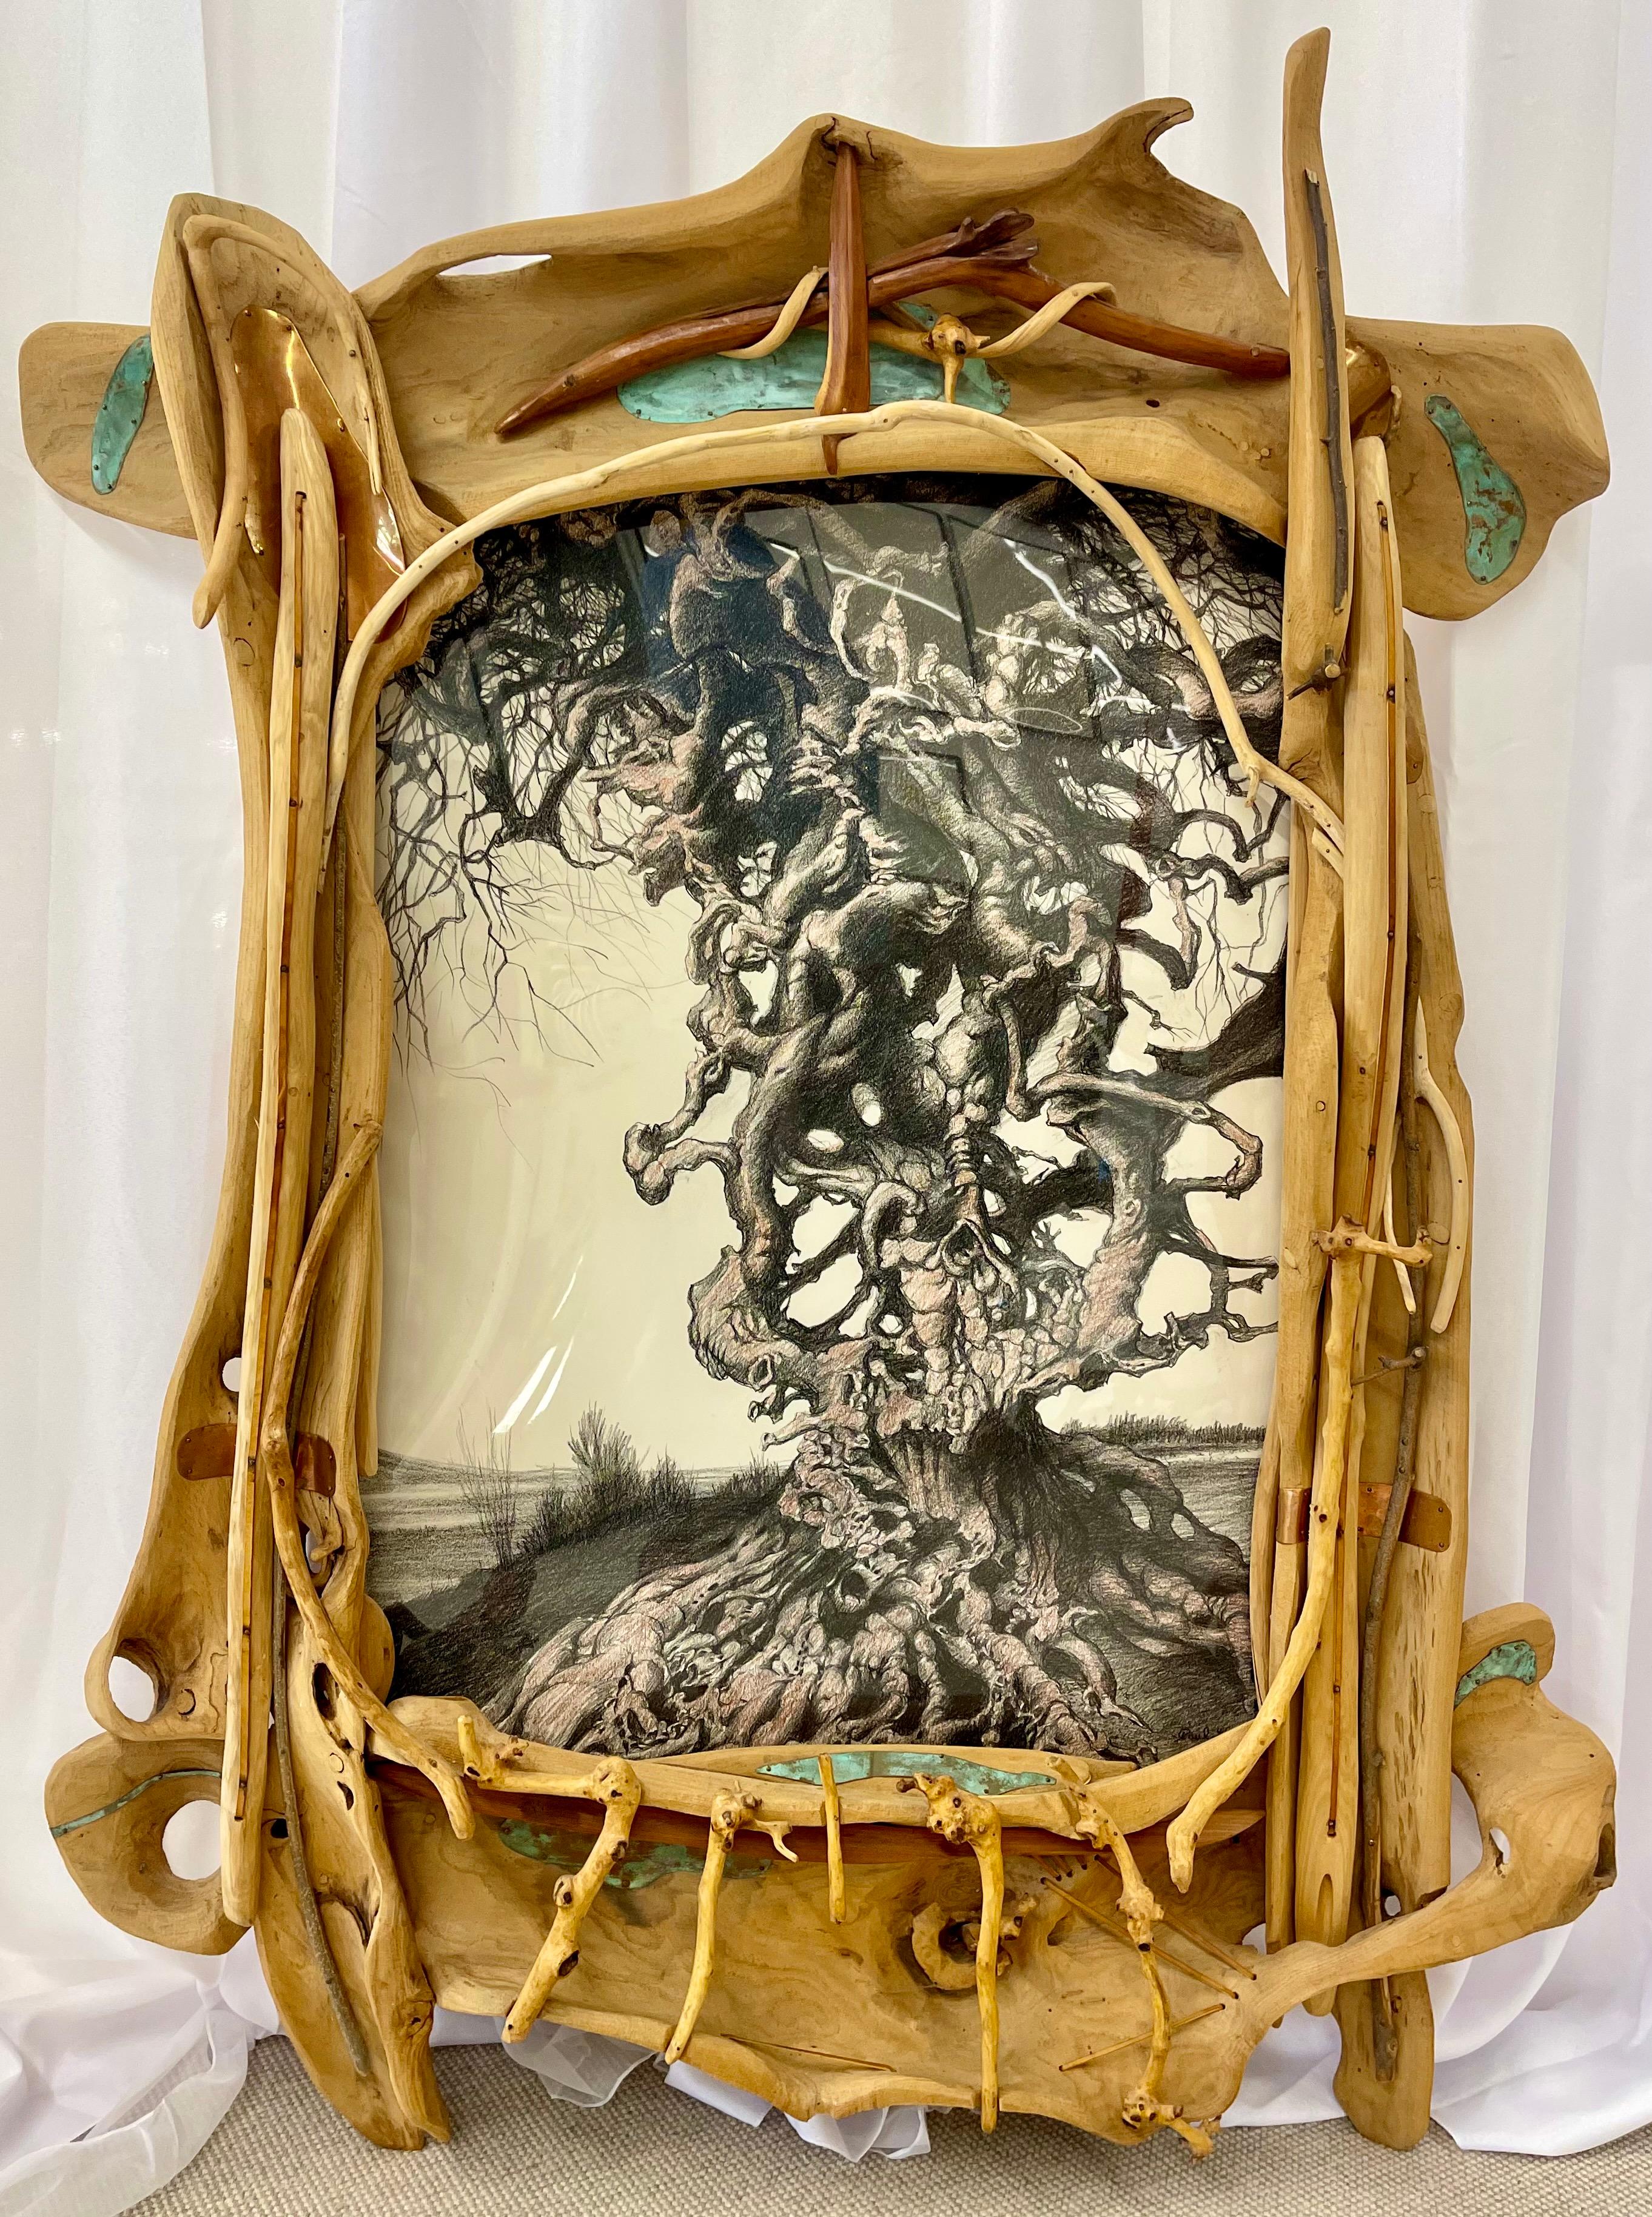 Eccentric Art Nouveau Rustic frame with a Signed Paul Gorka drawing large exotic wooden frame with heavily oxidized metal detailing throughout. A seemingly stunning frame that can easily be converted to a mirror.